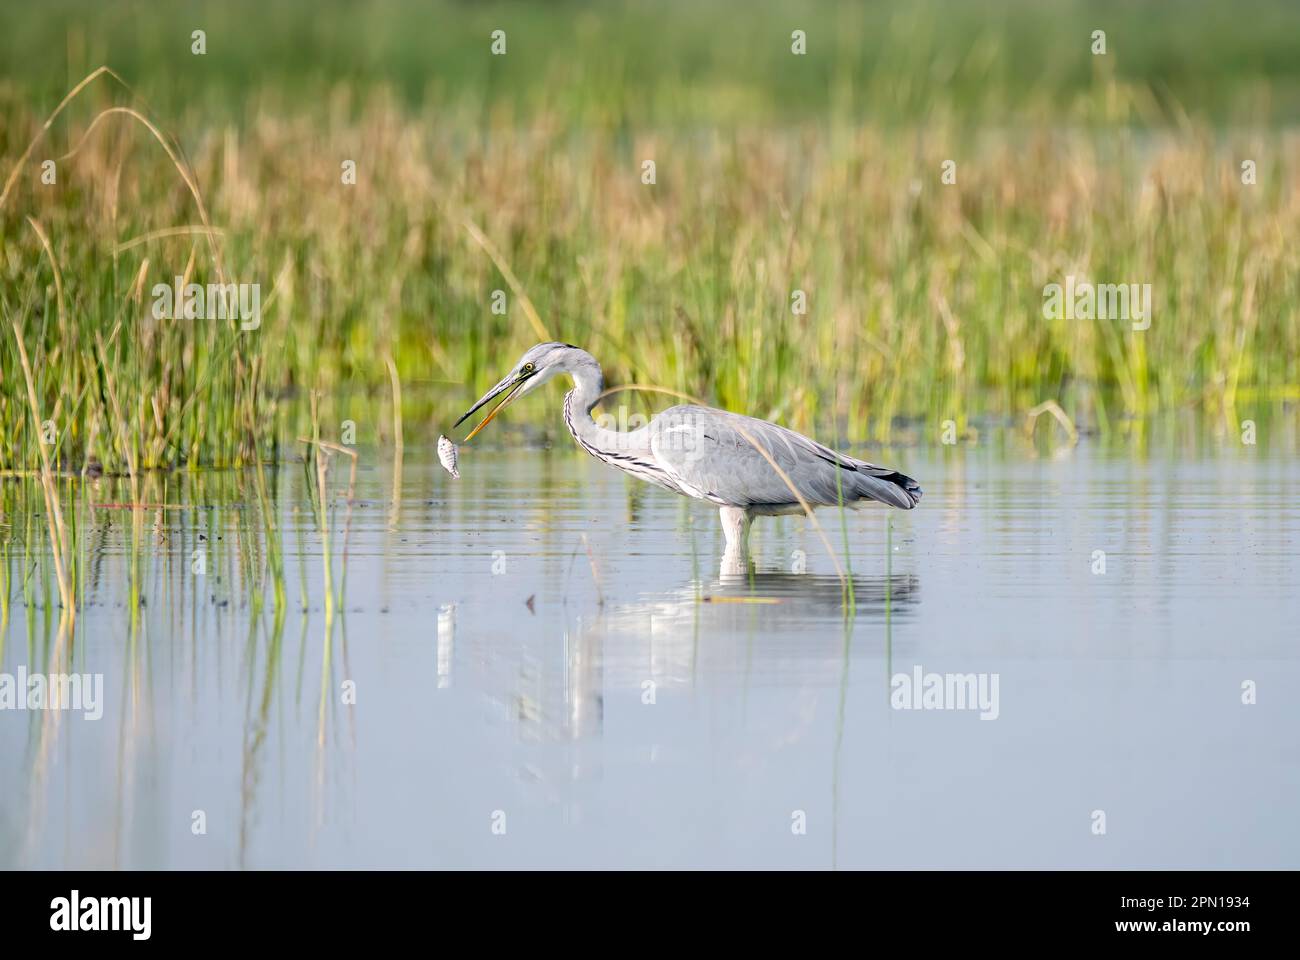 A grey heron catching fish in shallow waters of Nalsarovar bird sanctuary on the outskirts of Ahmedabad in Gujarat Stock Photo